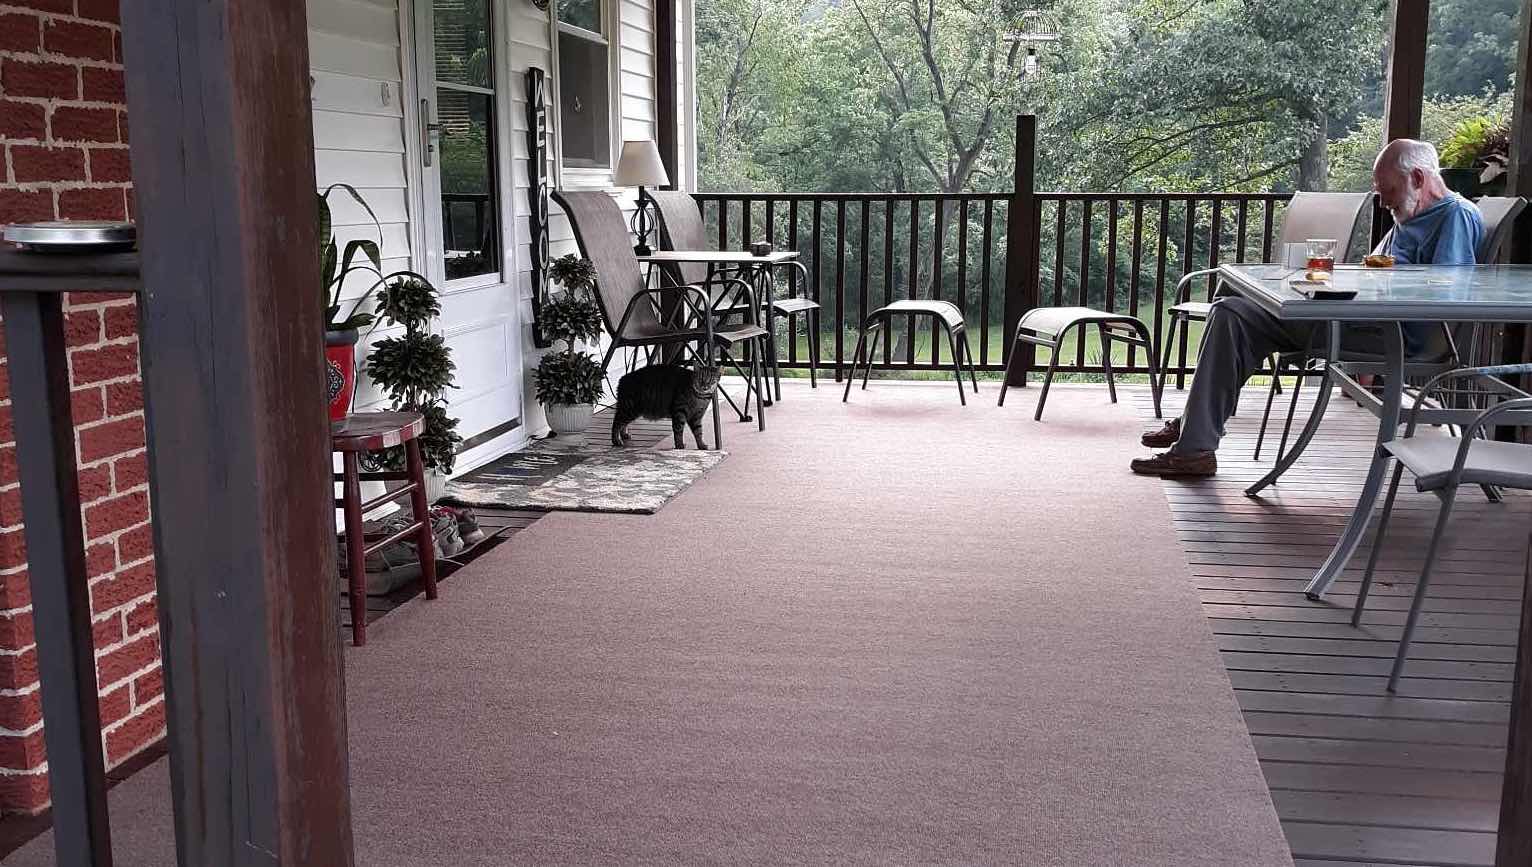 Bittersweet Brown Outdoor Carpet UV Protected and Durable